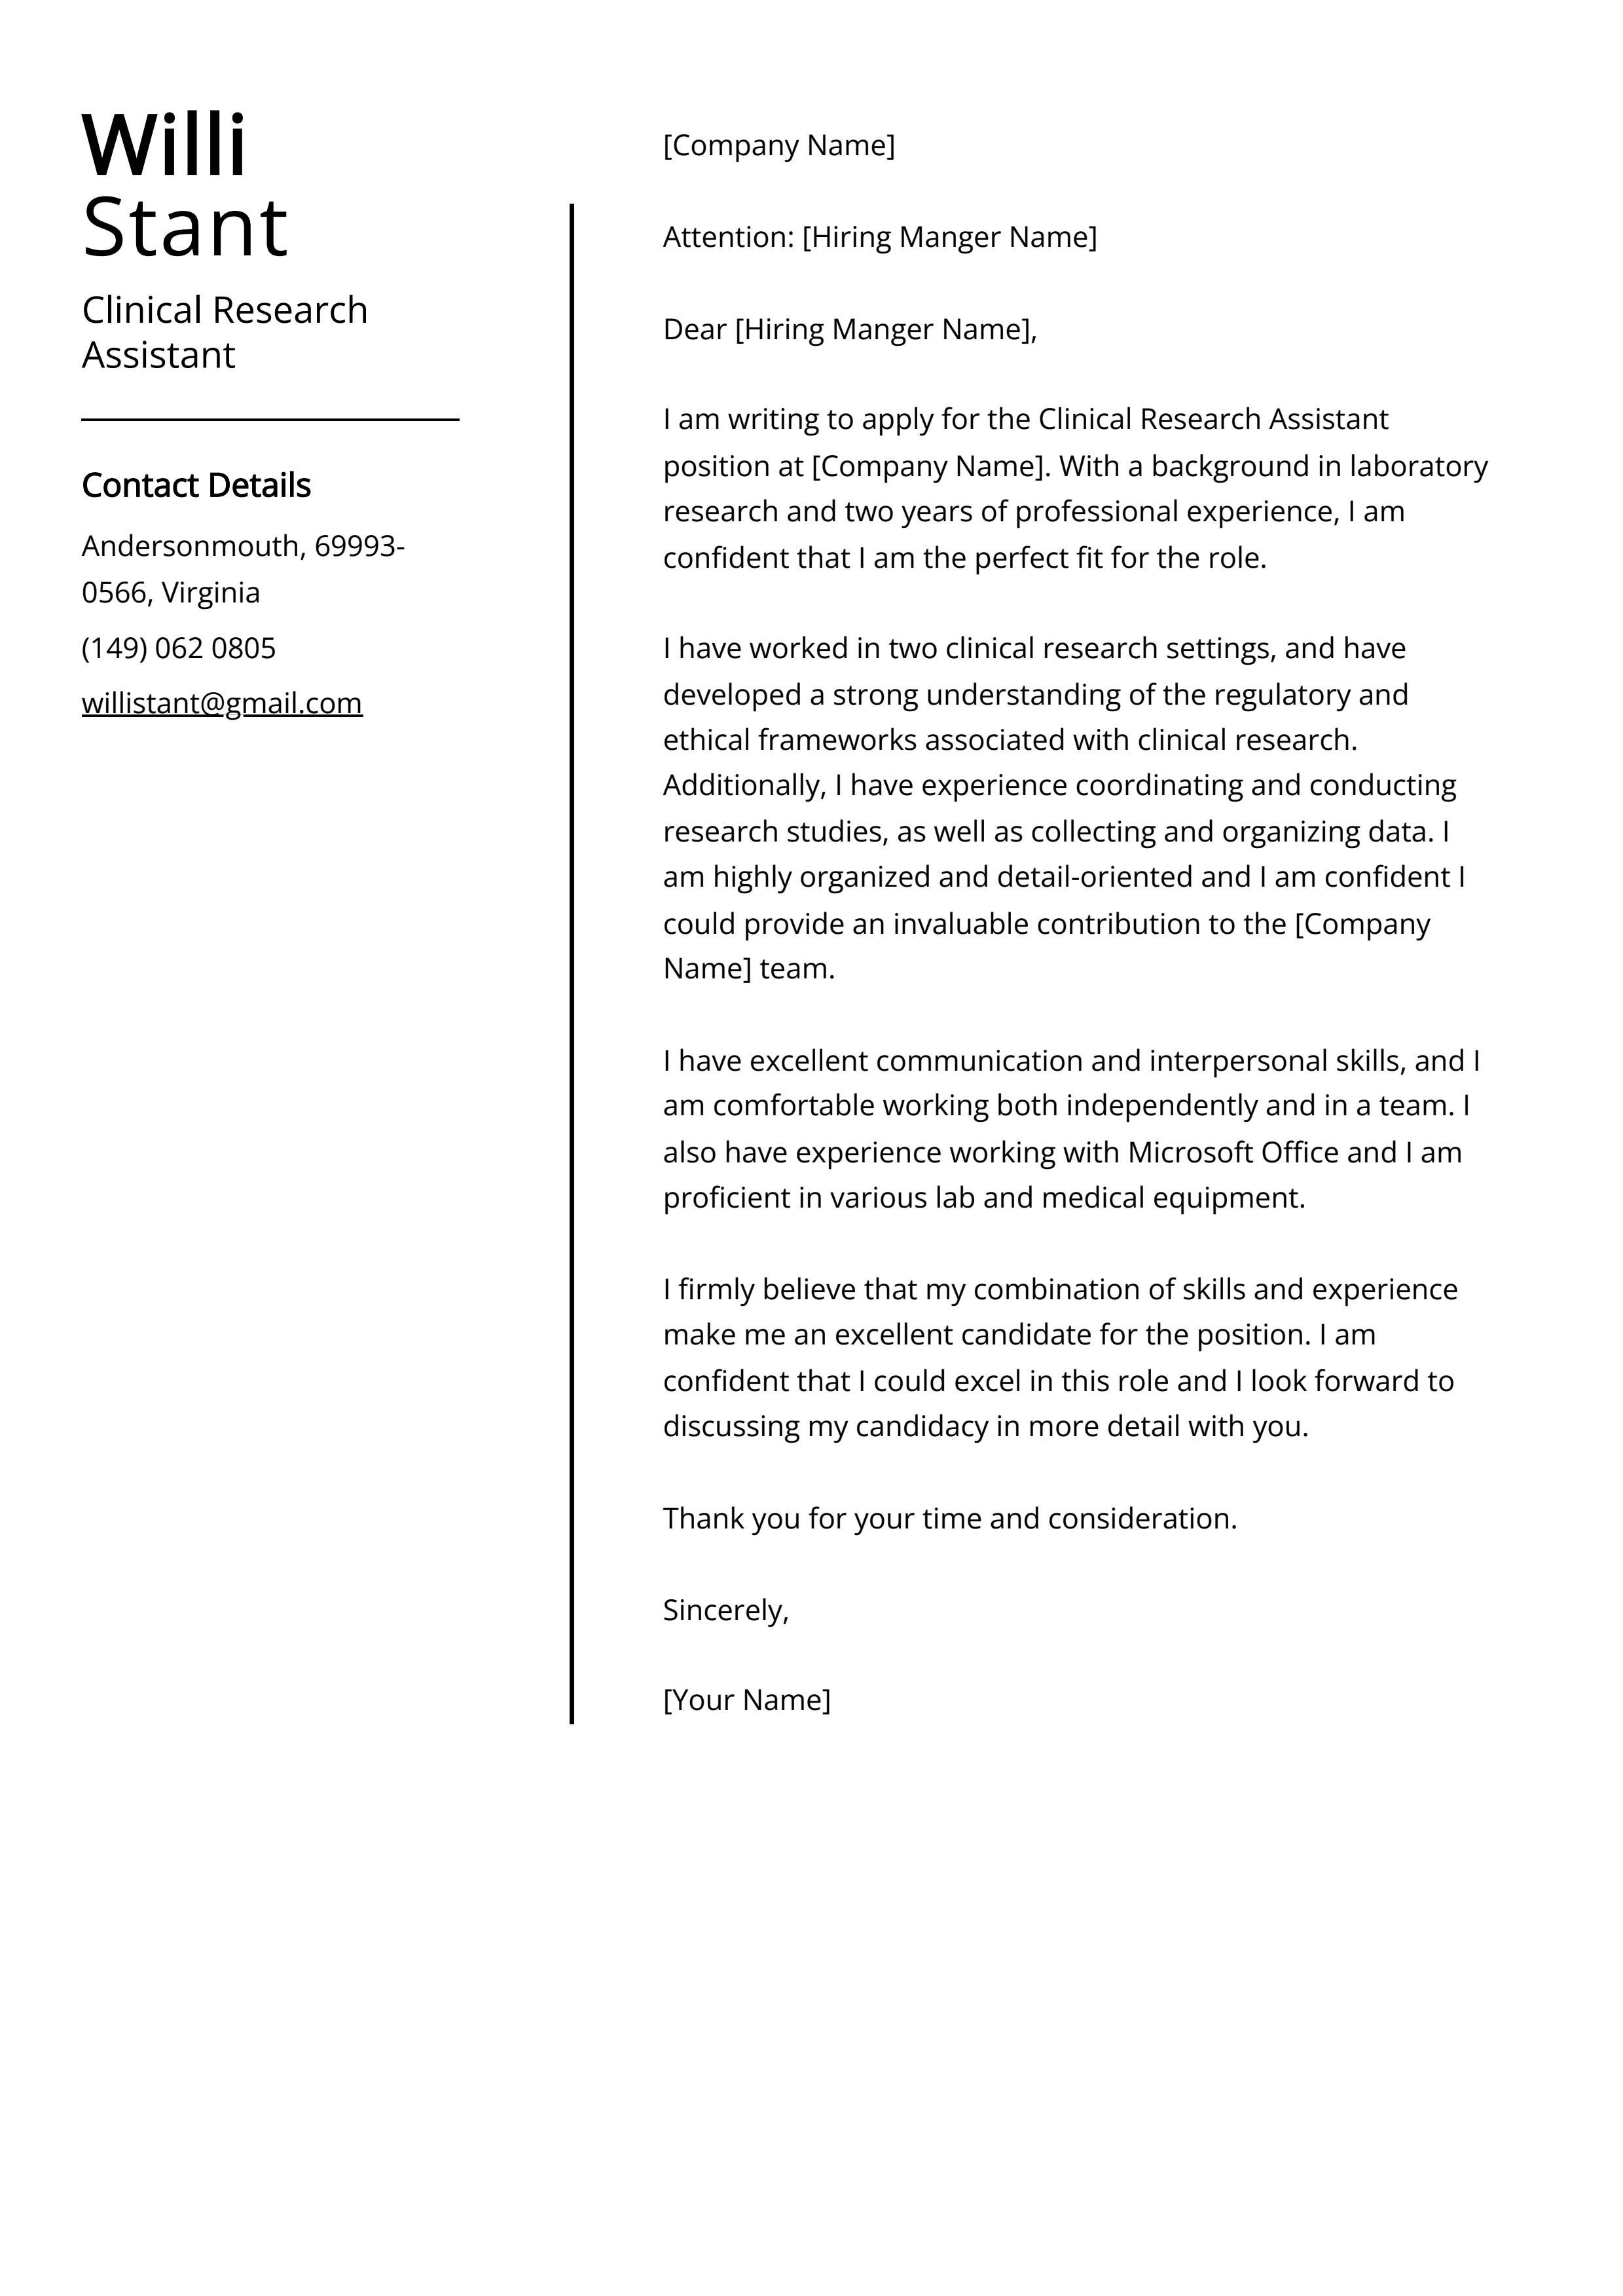 Clinical Research Assistant Cover Letter Example